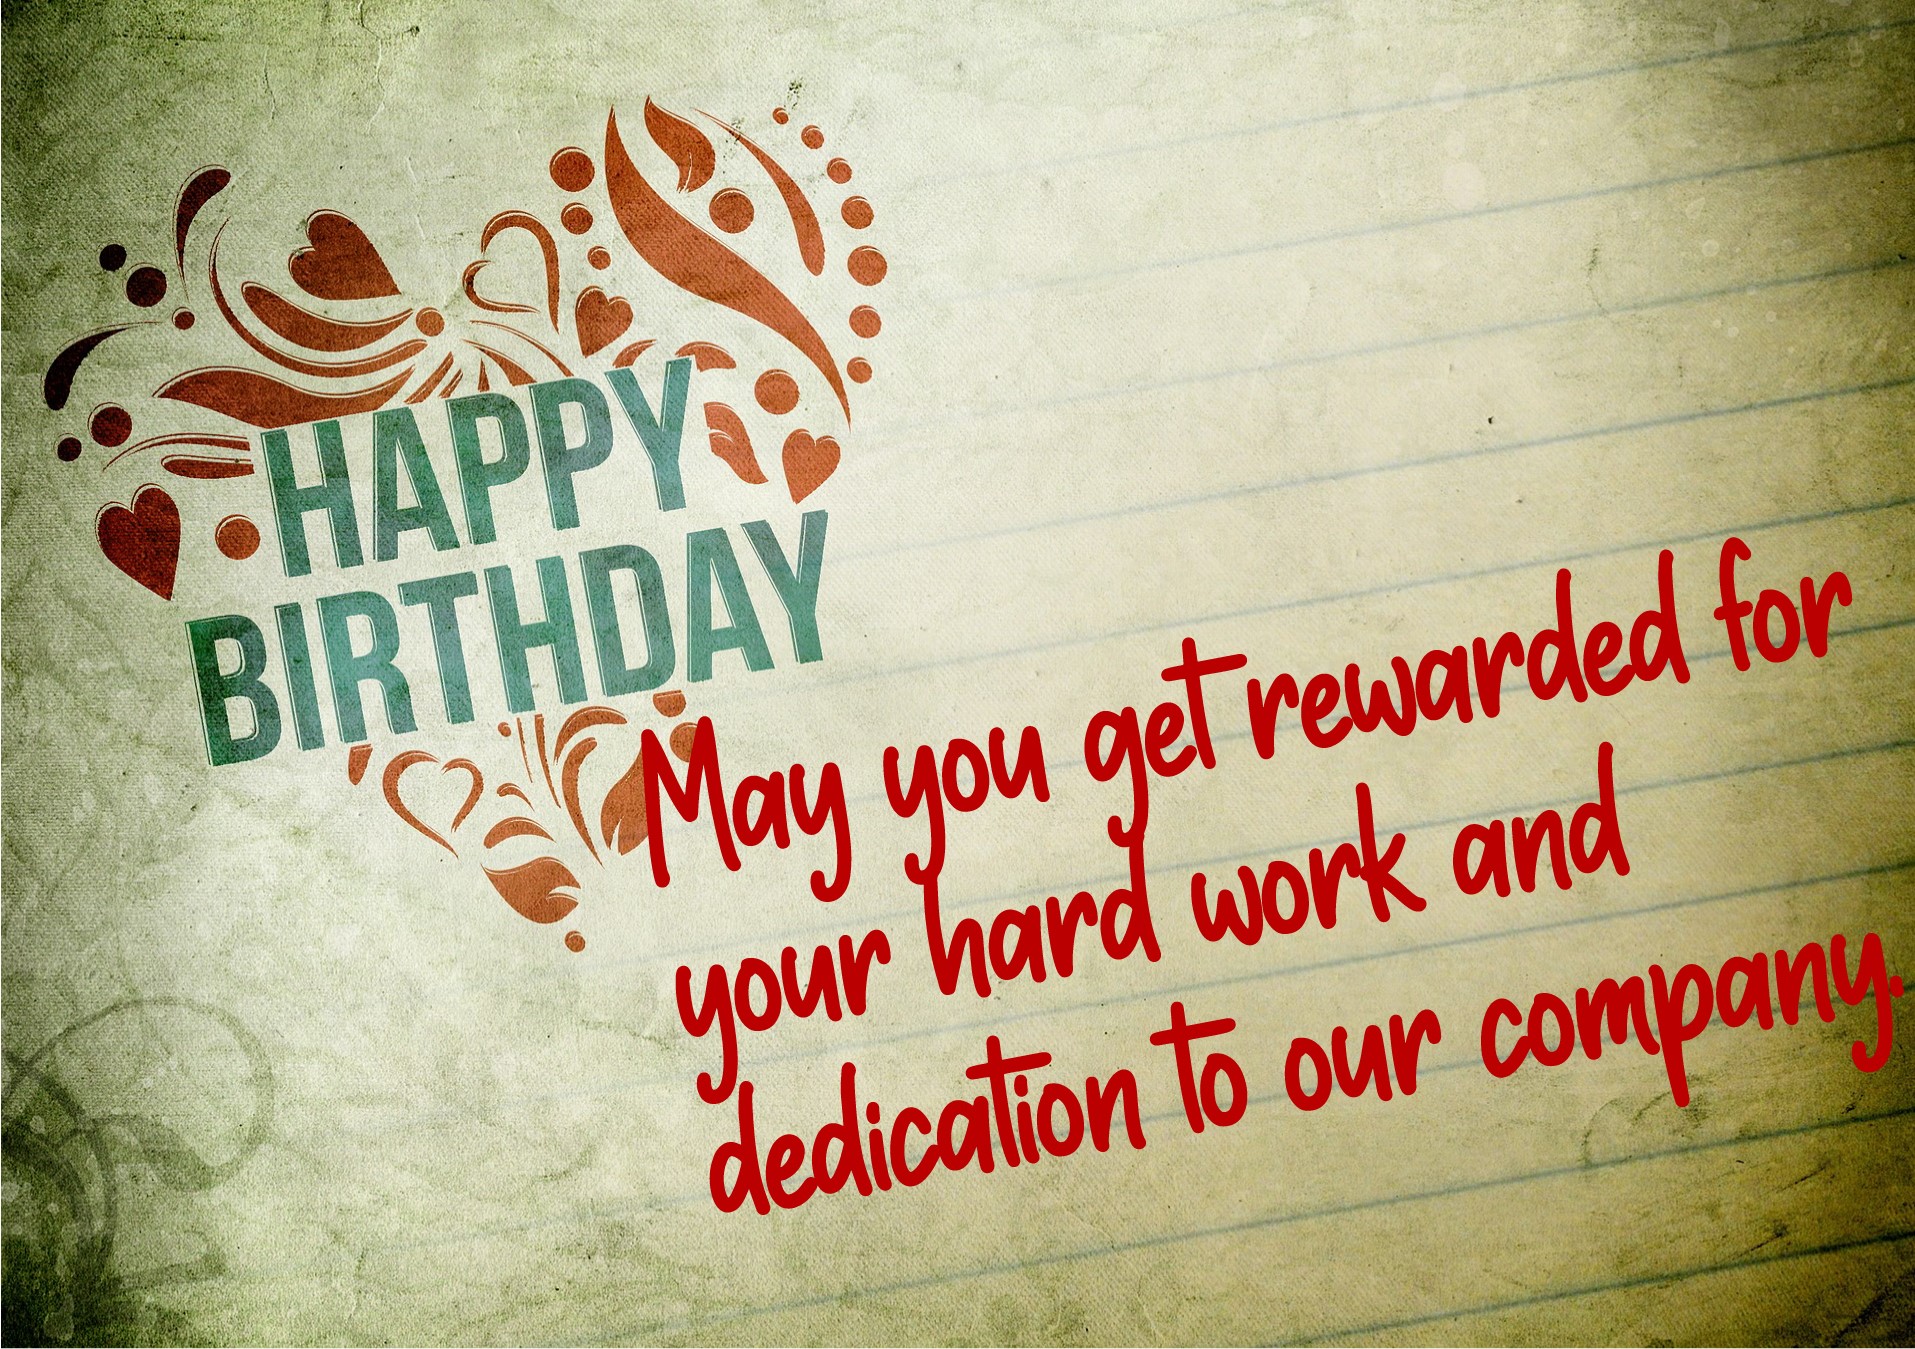 Birthday wishes for coworkers and colleagues - Best Wisher